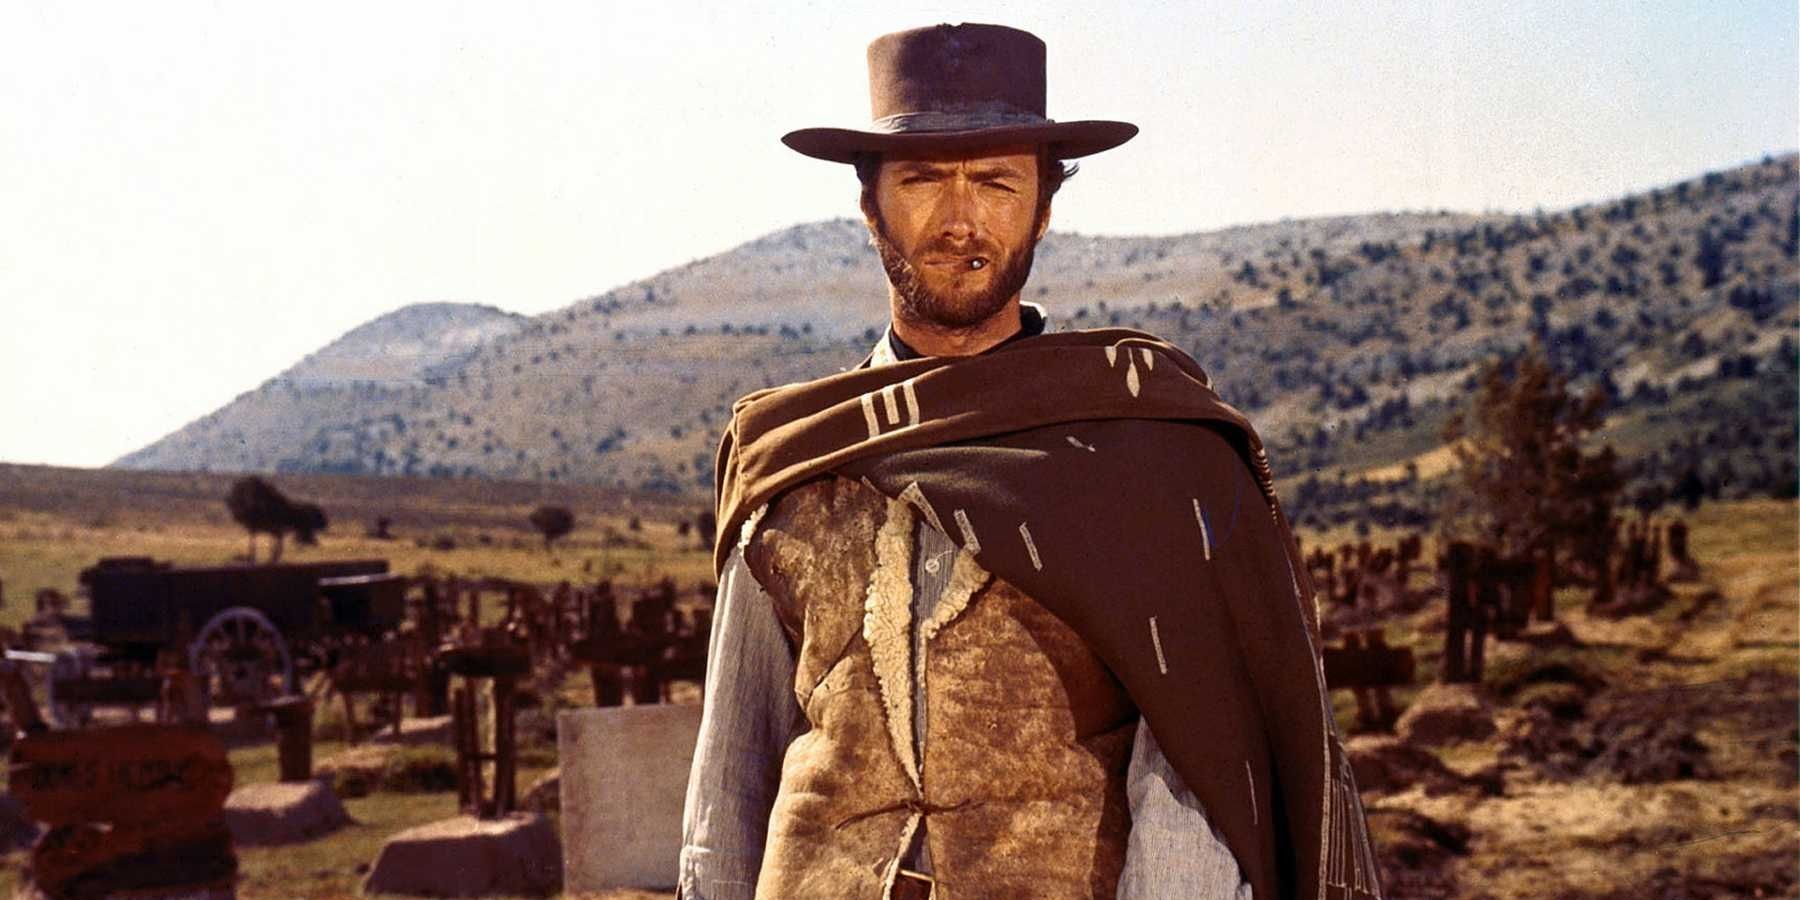 Clint-Eastwood-in-The-Good-the-Bad-and-the-Ugly-Stare